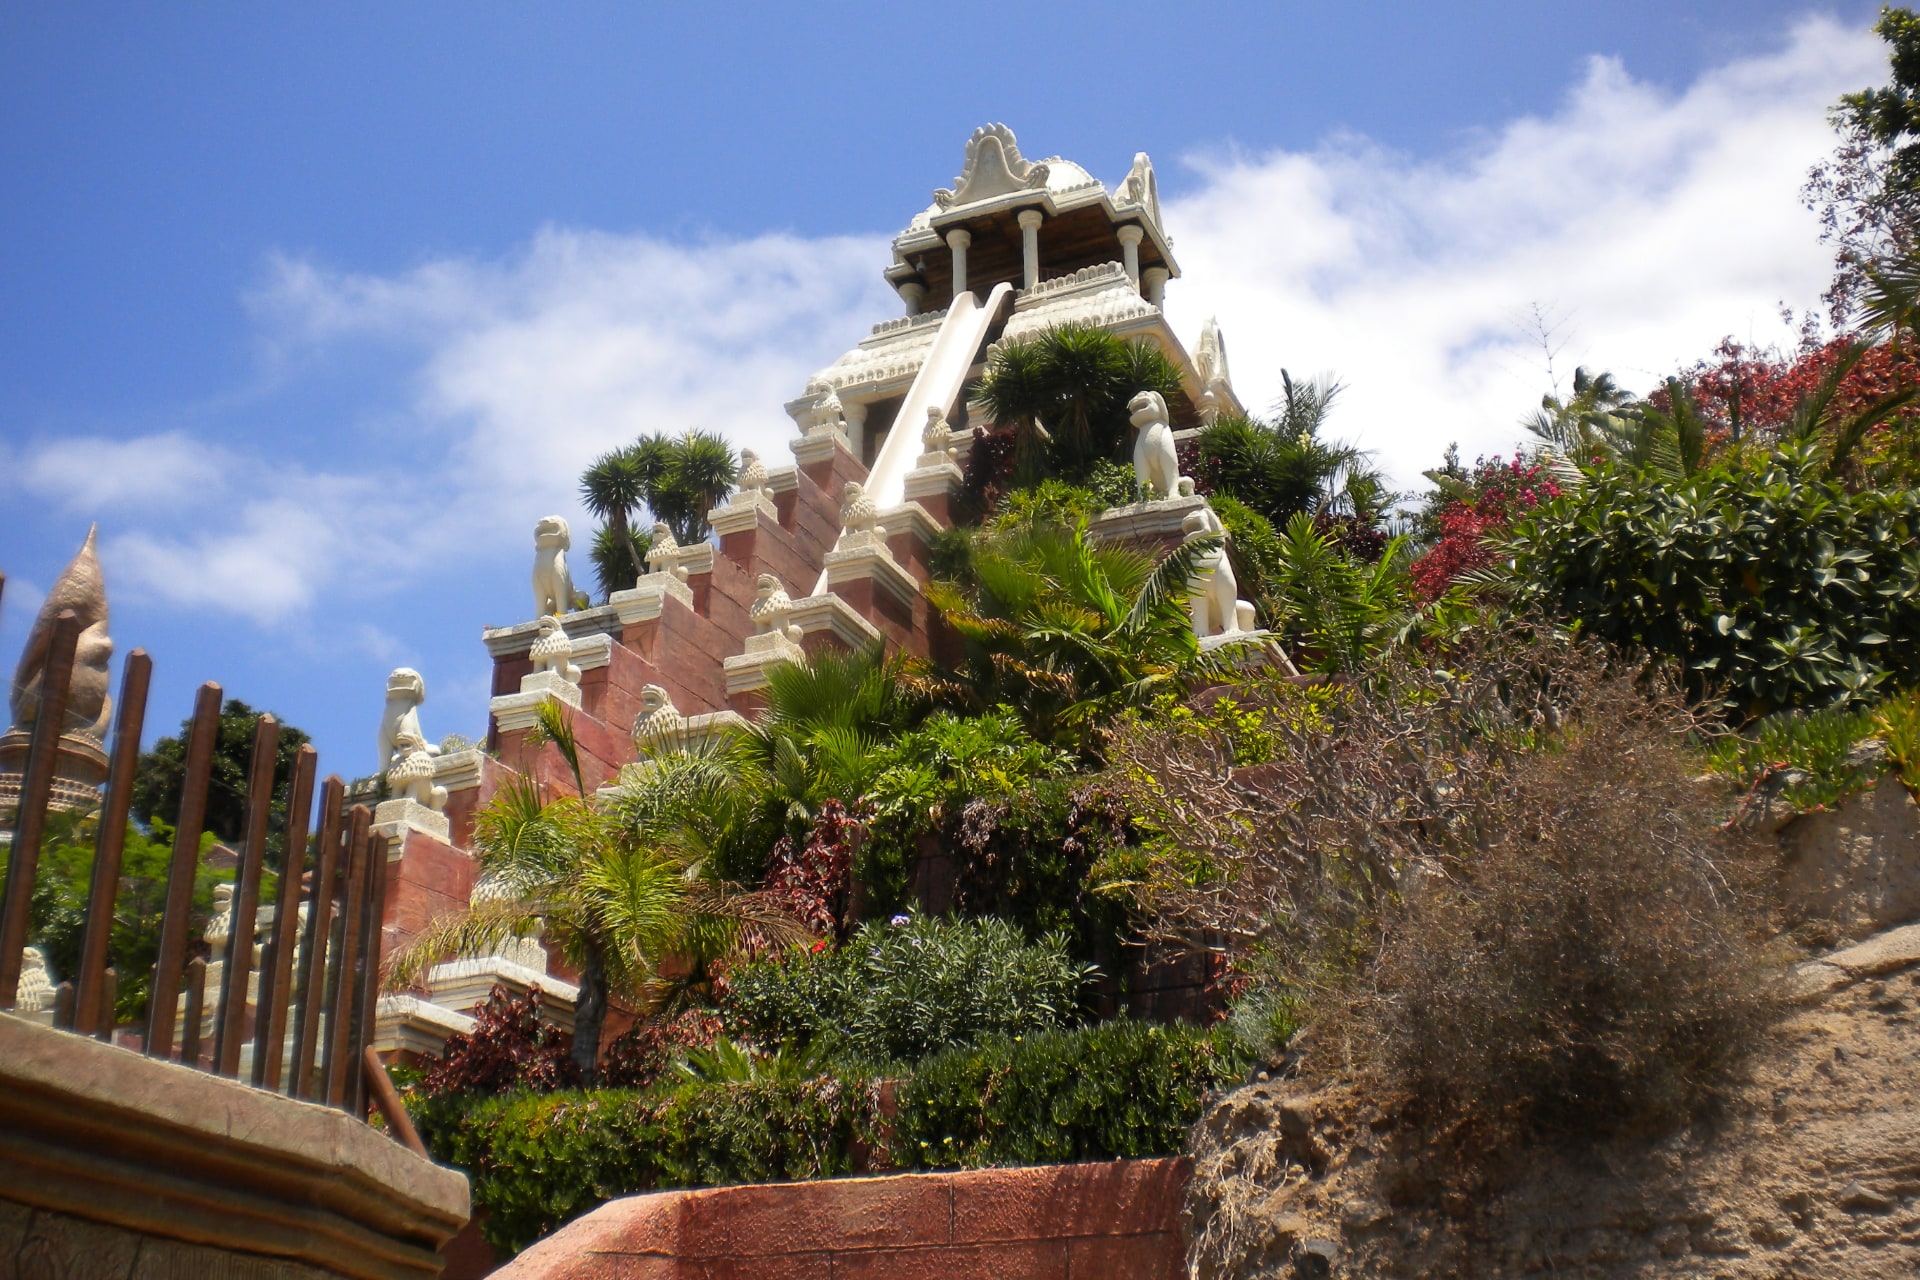 Lower view of the impressive Tower of Power slide at Siam Park in Tenerife